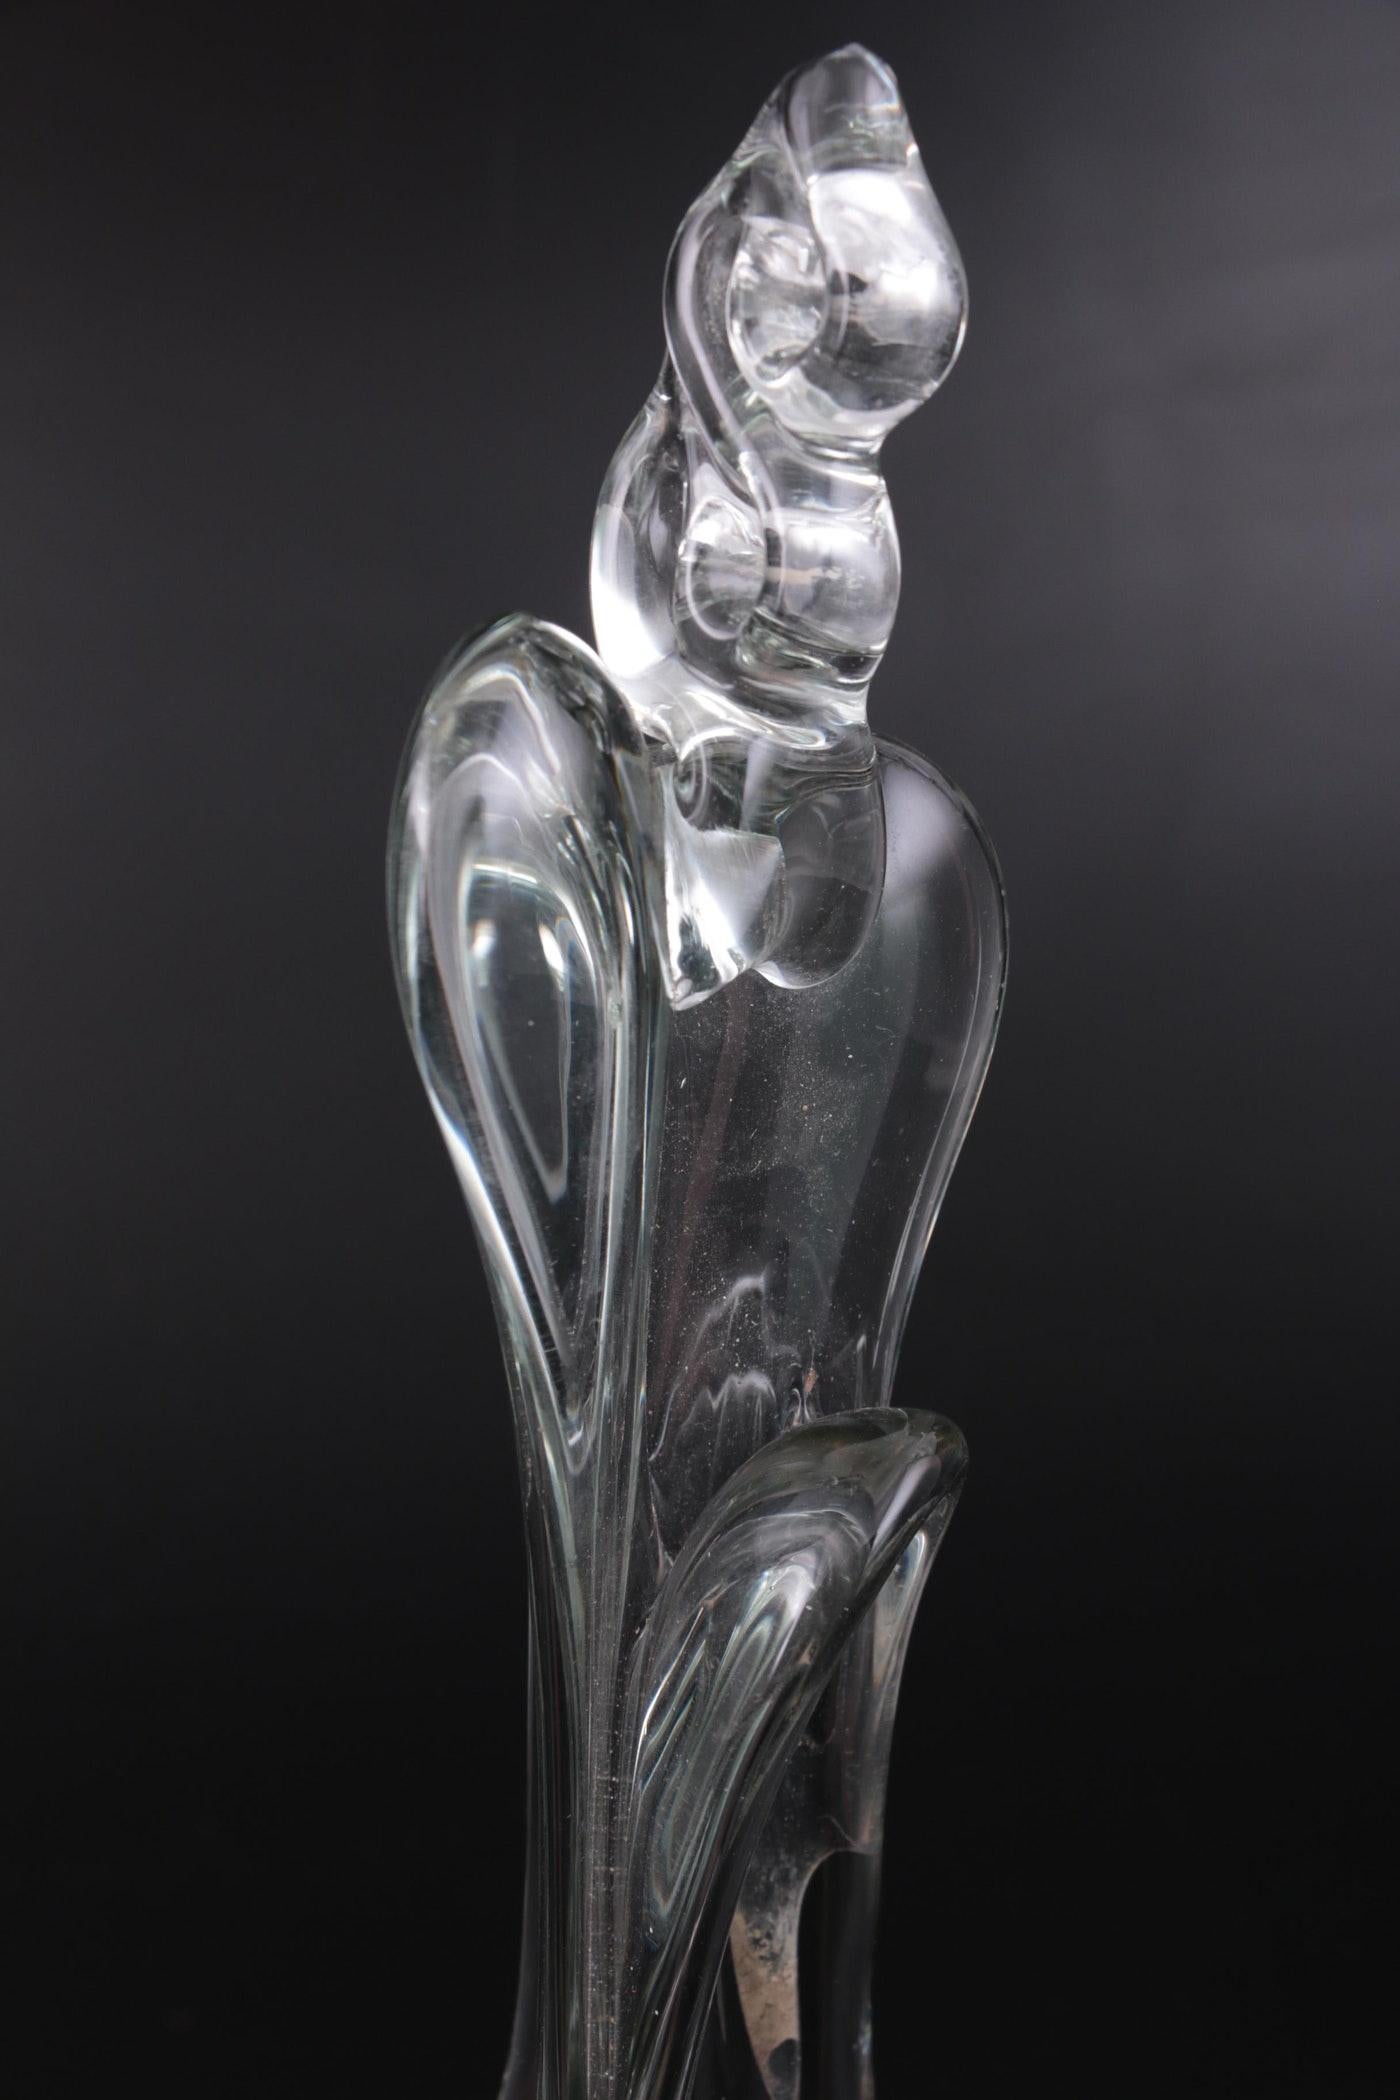 Introducing the exquisite Handblown Studio Art Glass Sculpture by renowned artist John Bingham, a highly collectible piece that exudes timeless elegance. Crafted in the USA back in 1976, this captivating work of art showcases the unparalleled skill